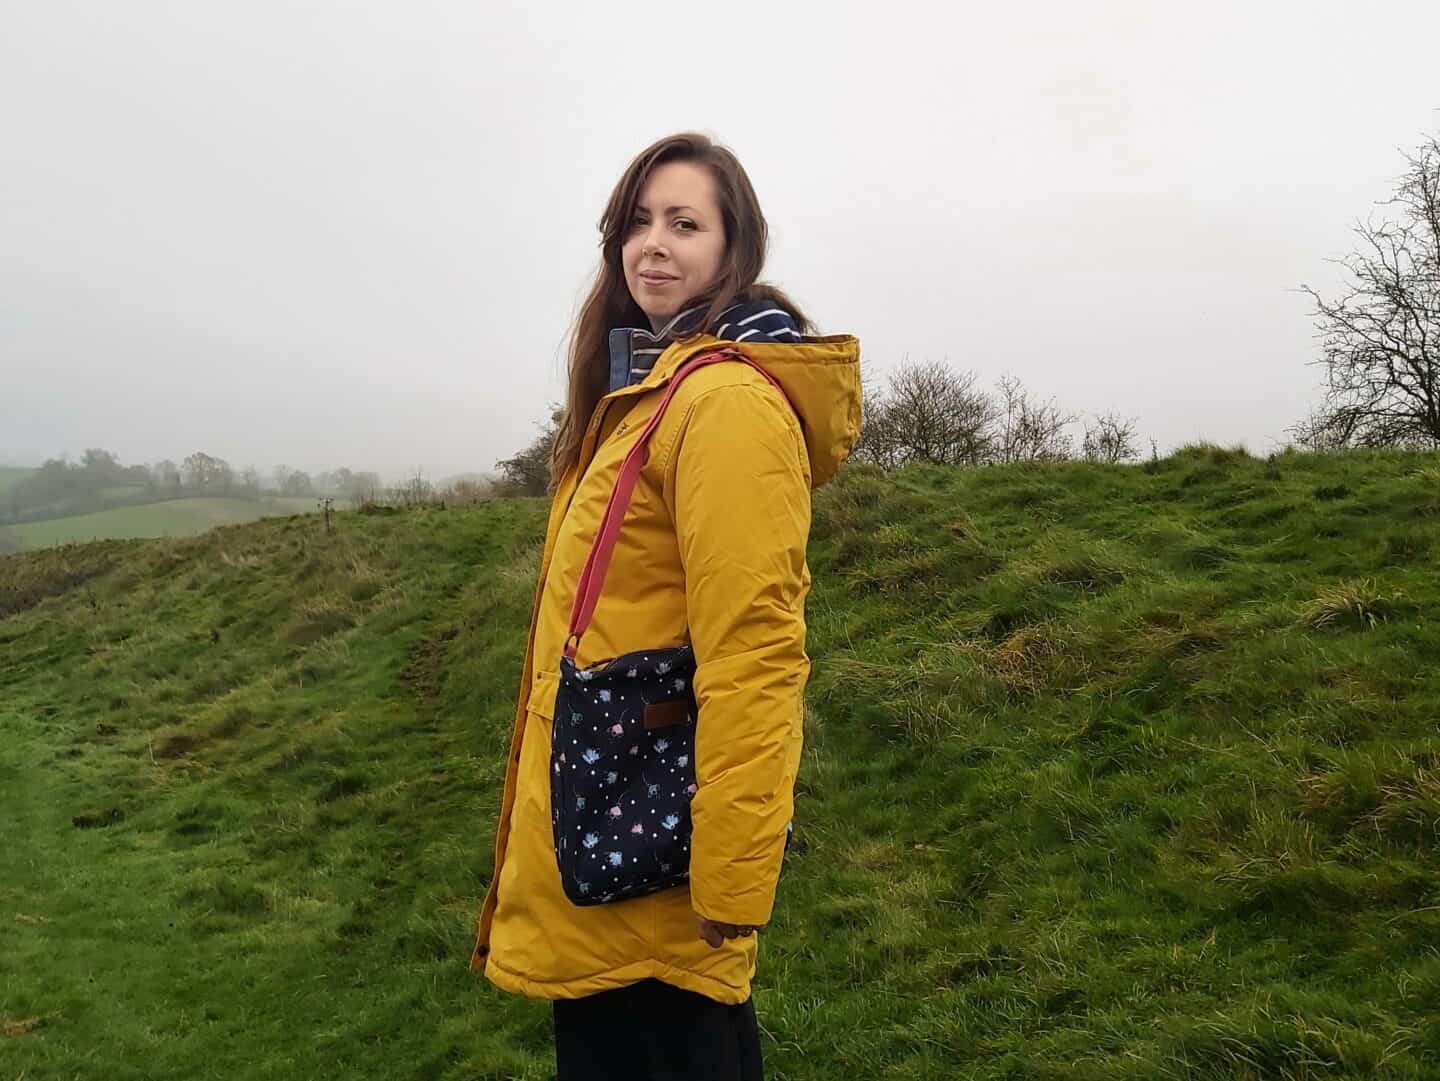 Wearing a yellow raincoat and blue bag with pink strap standing on grass on foggy day